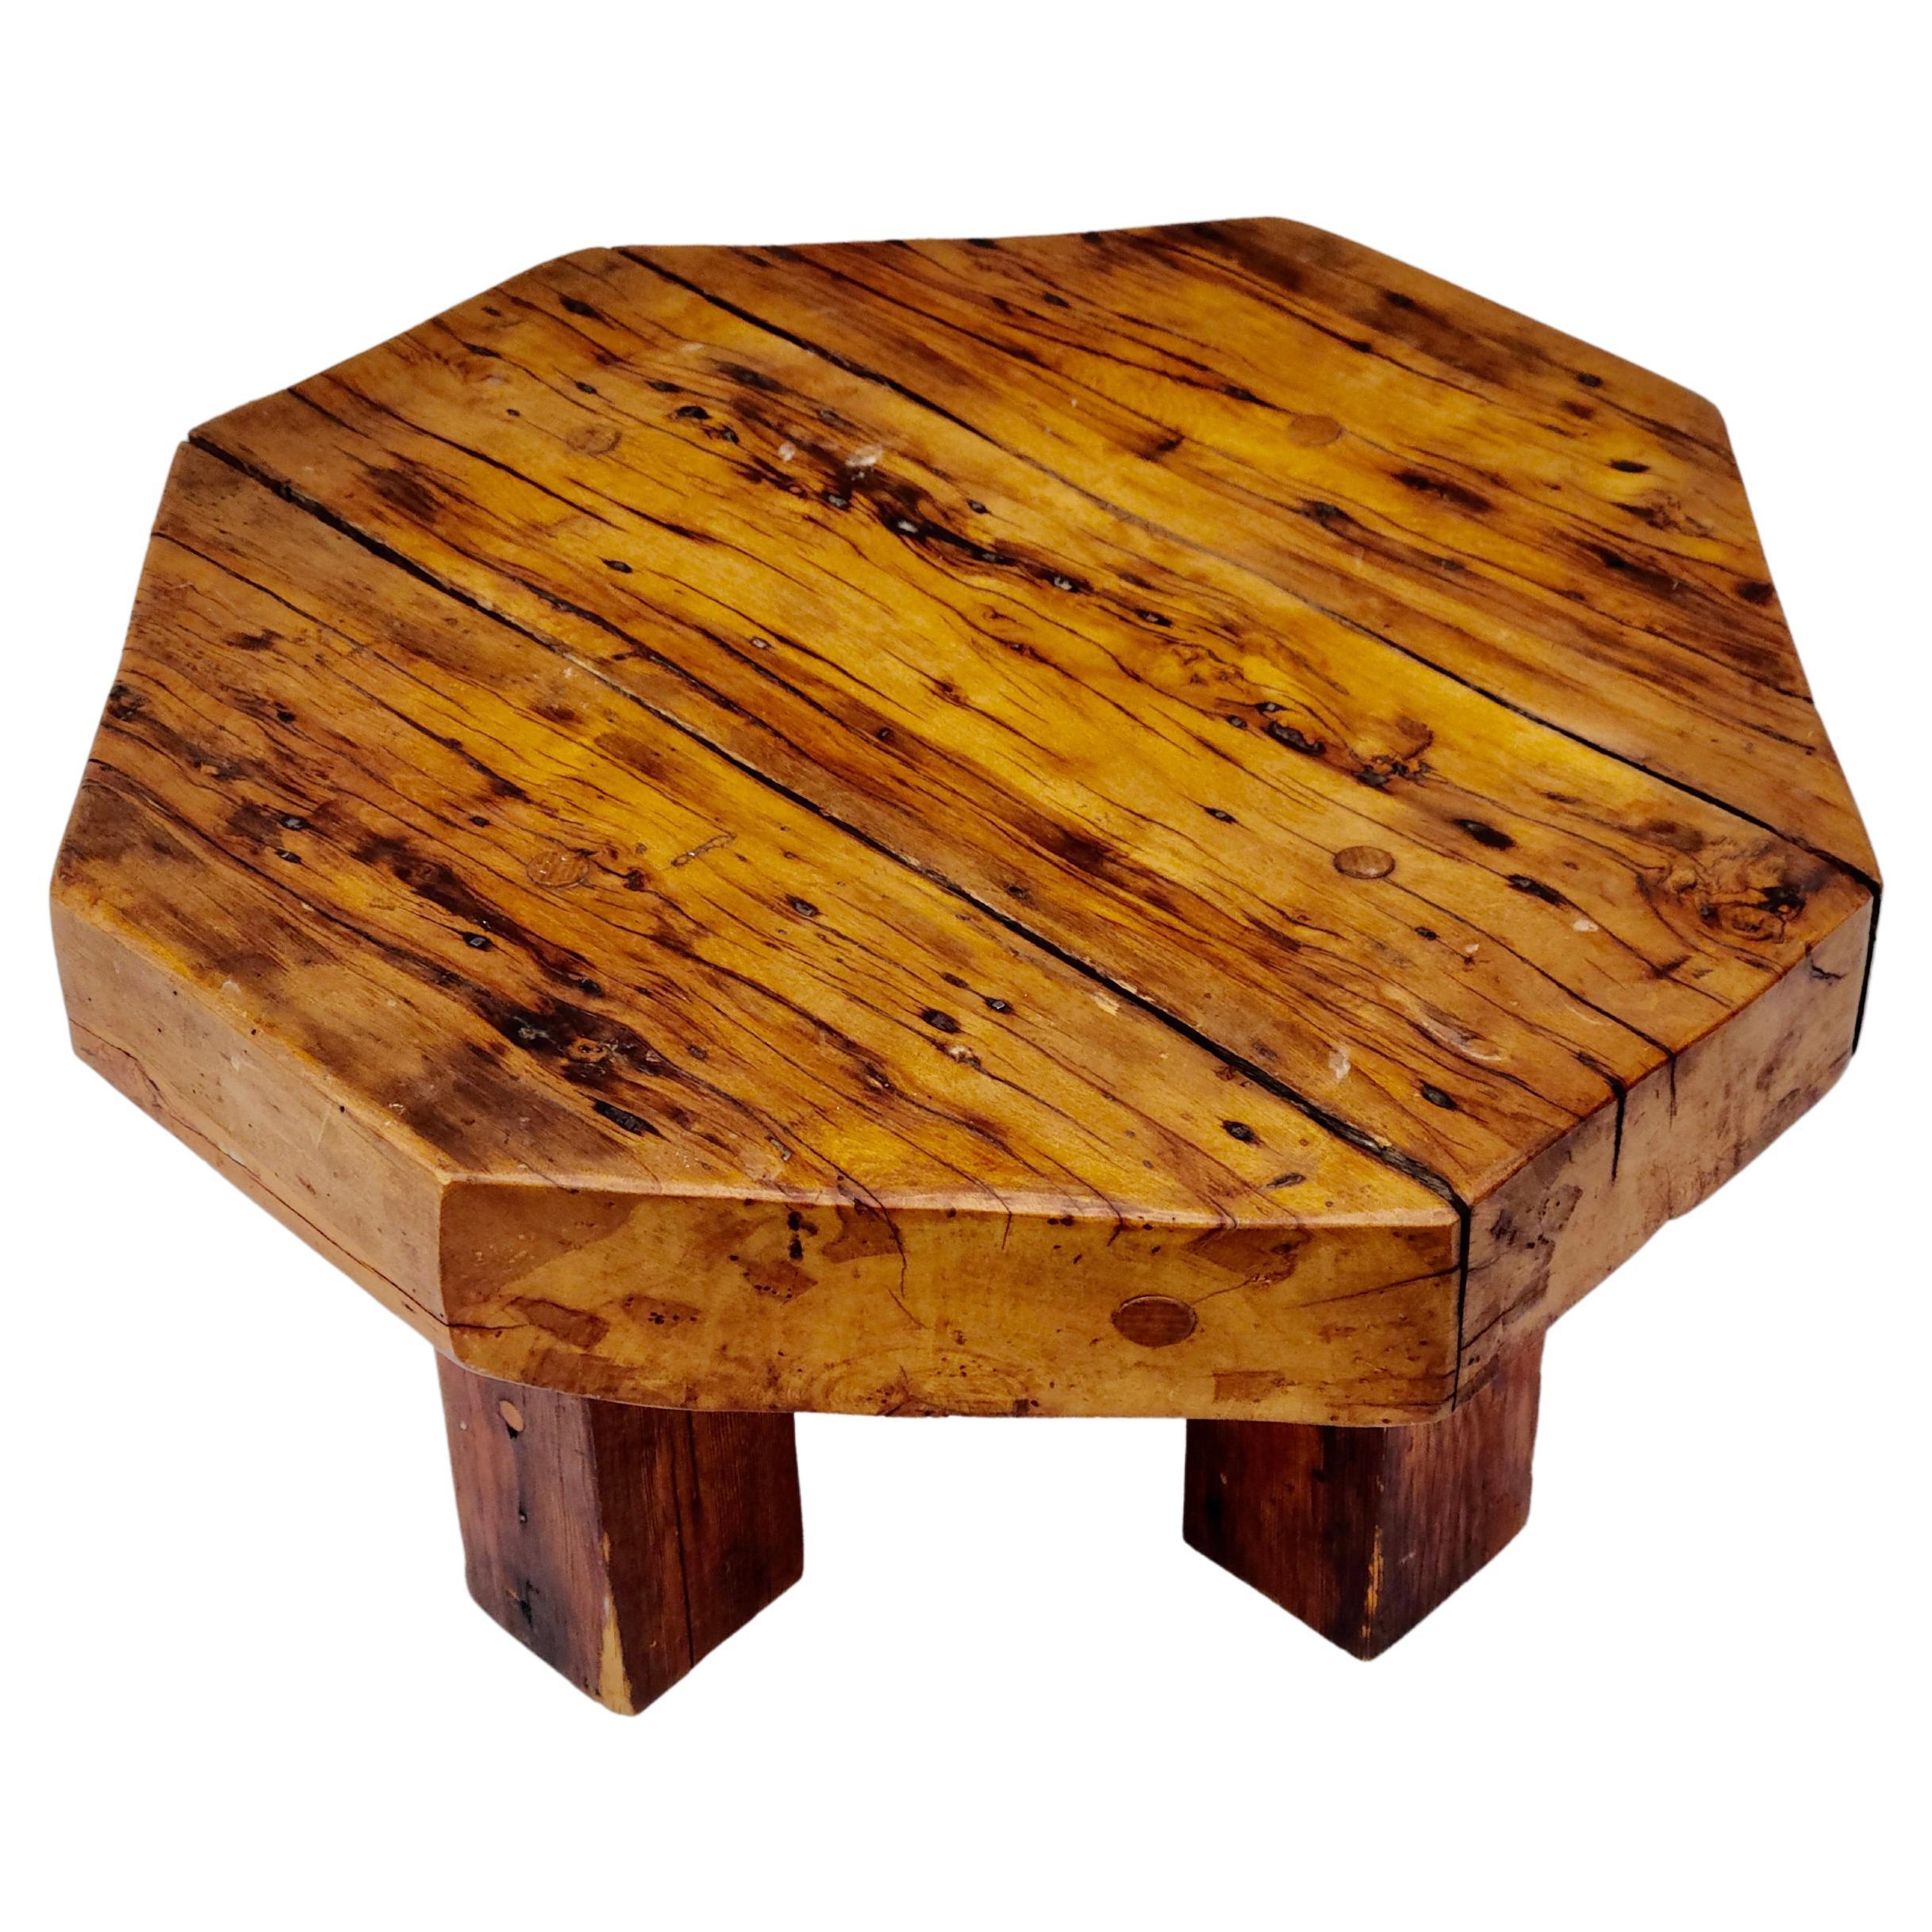 Studio Craft Coffee Table Spalted Applewood and Fir Signed Tom WIlliams For Sale